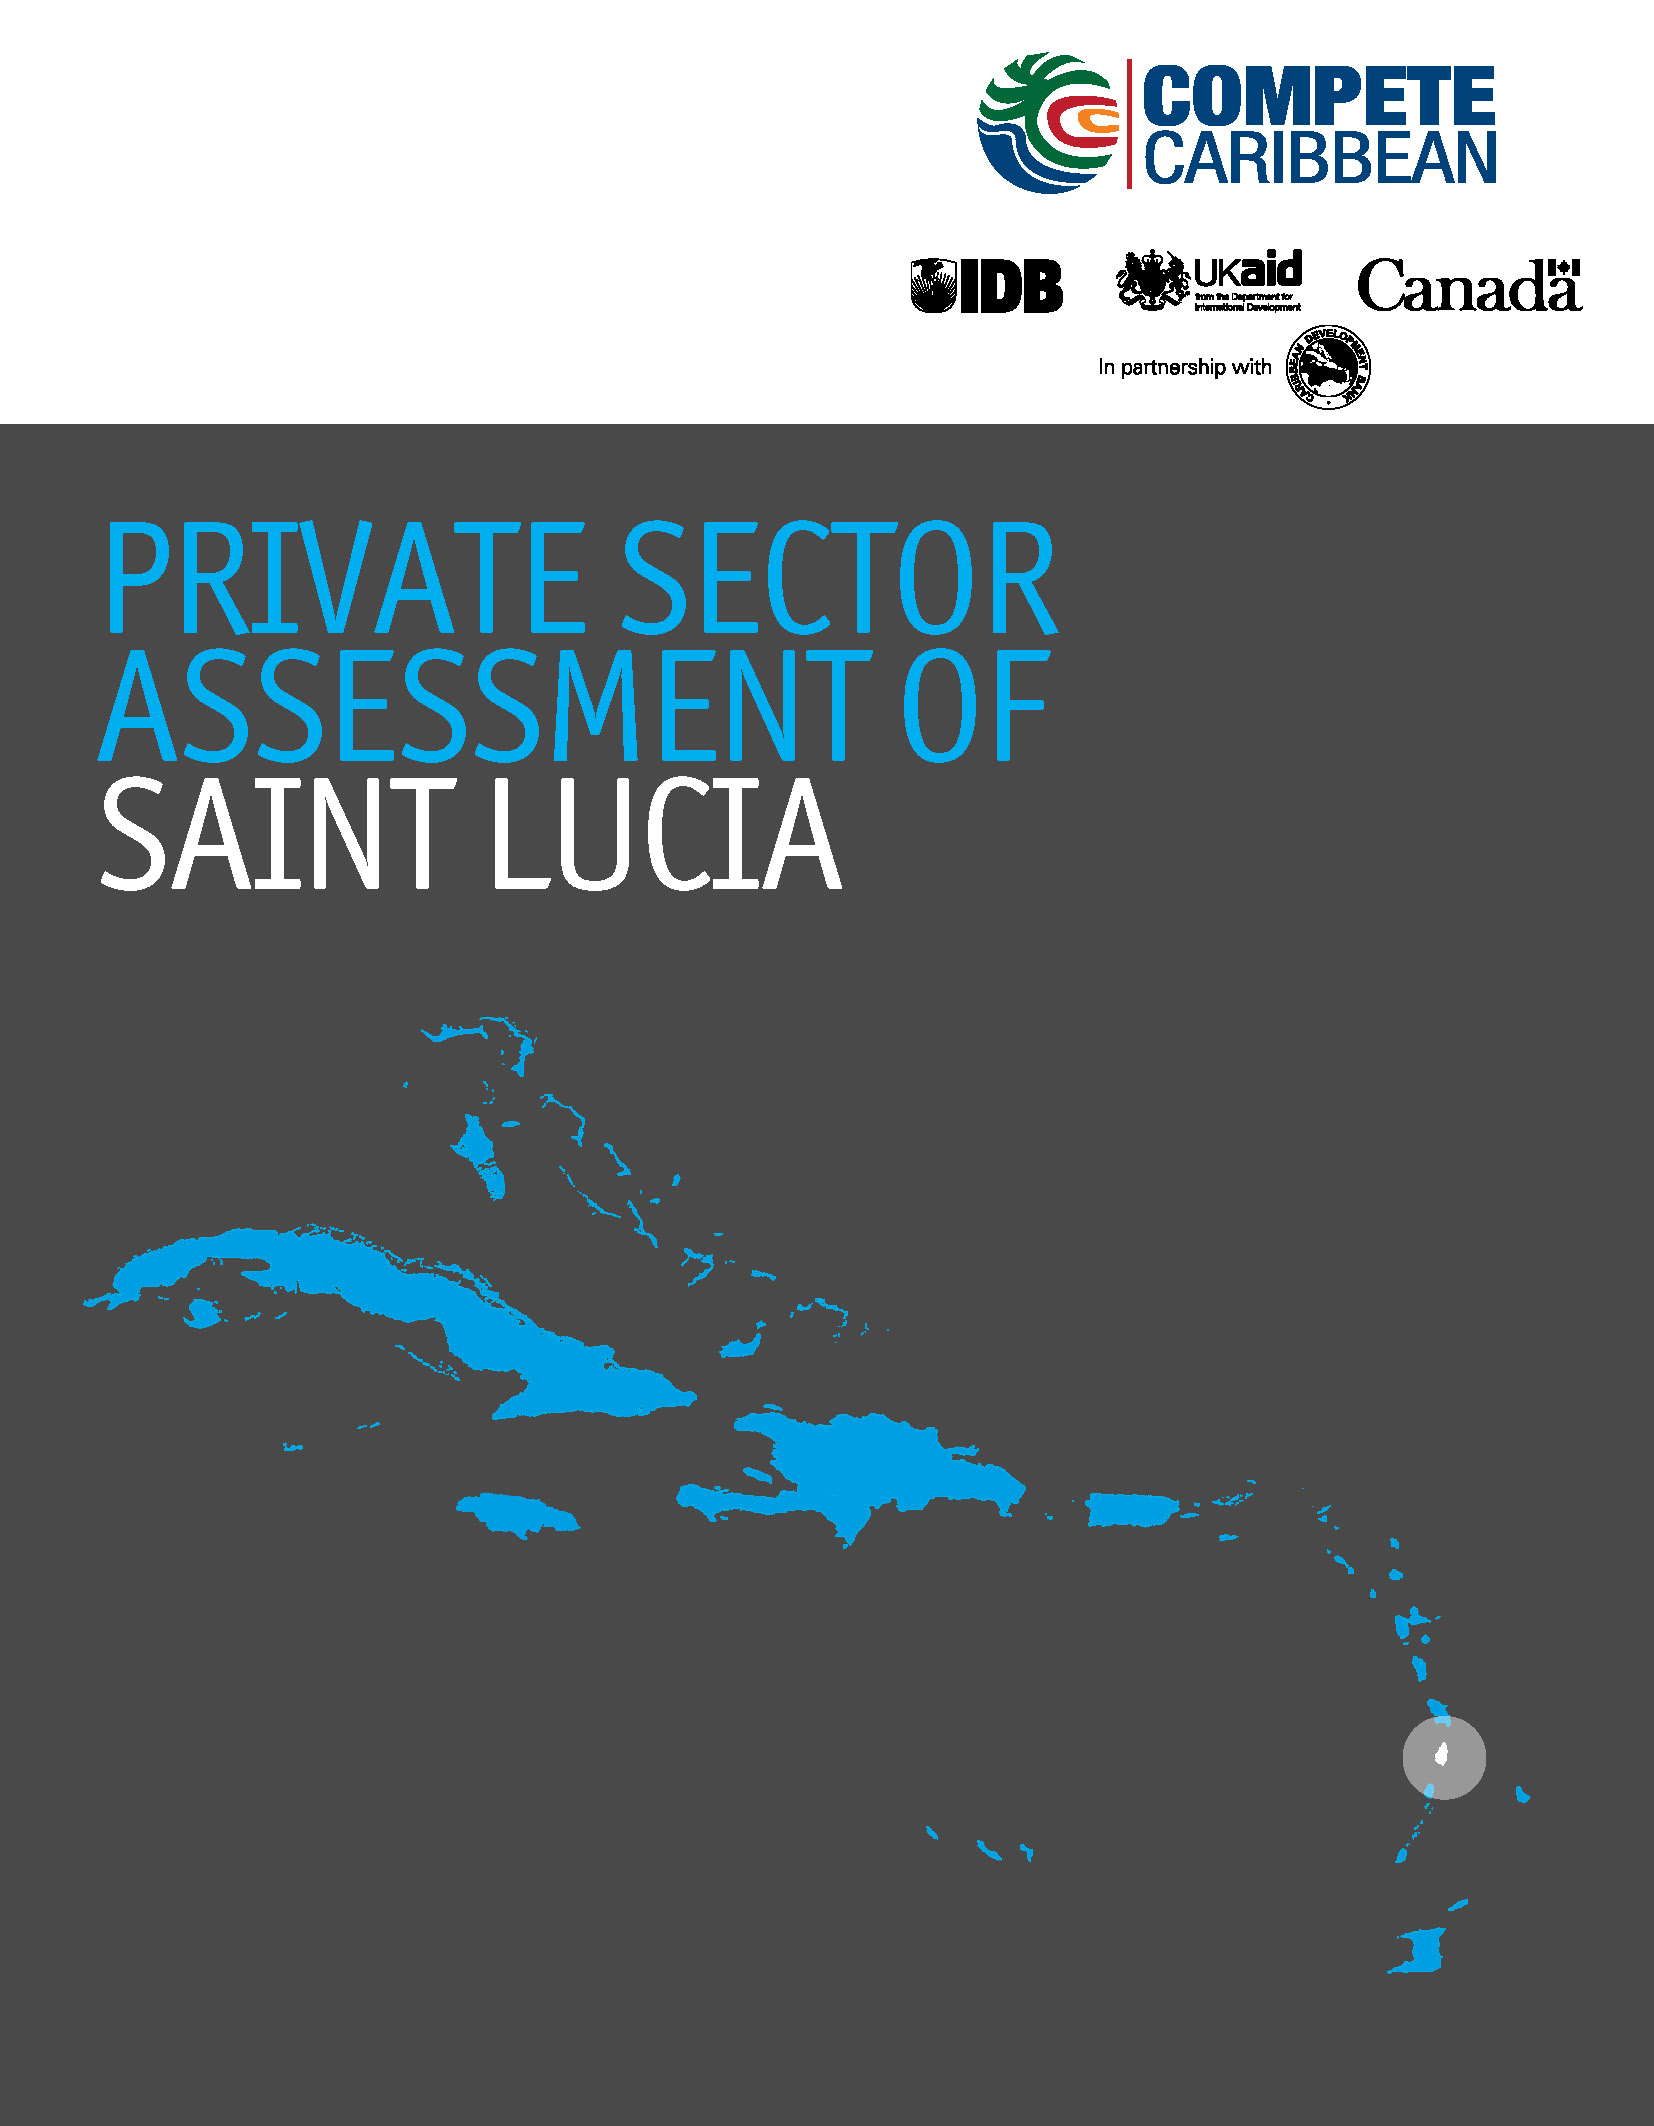 cover showing island chain with Saint Lucia highlighted